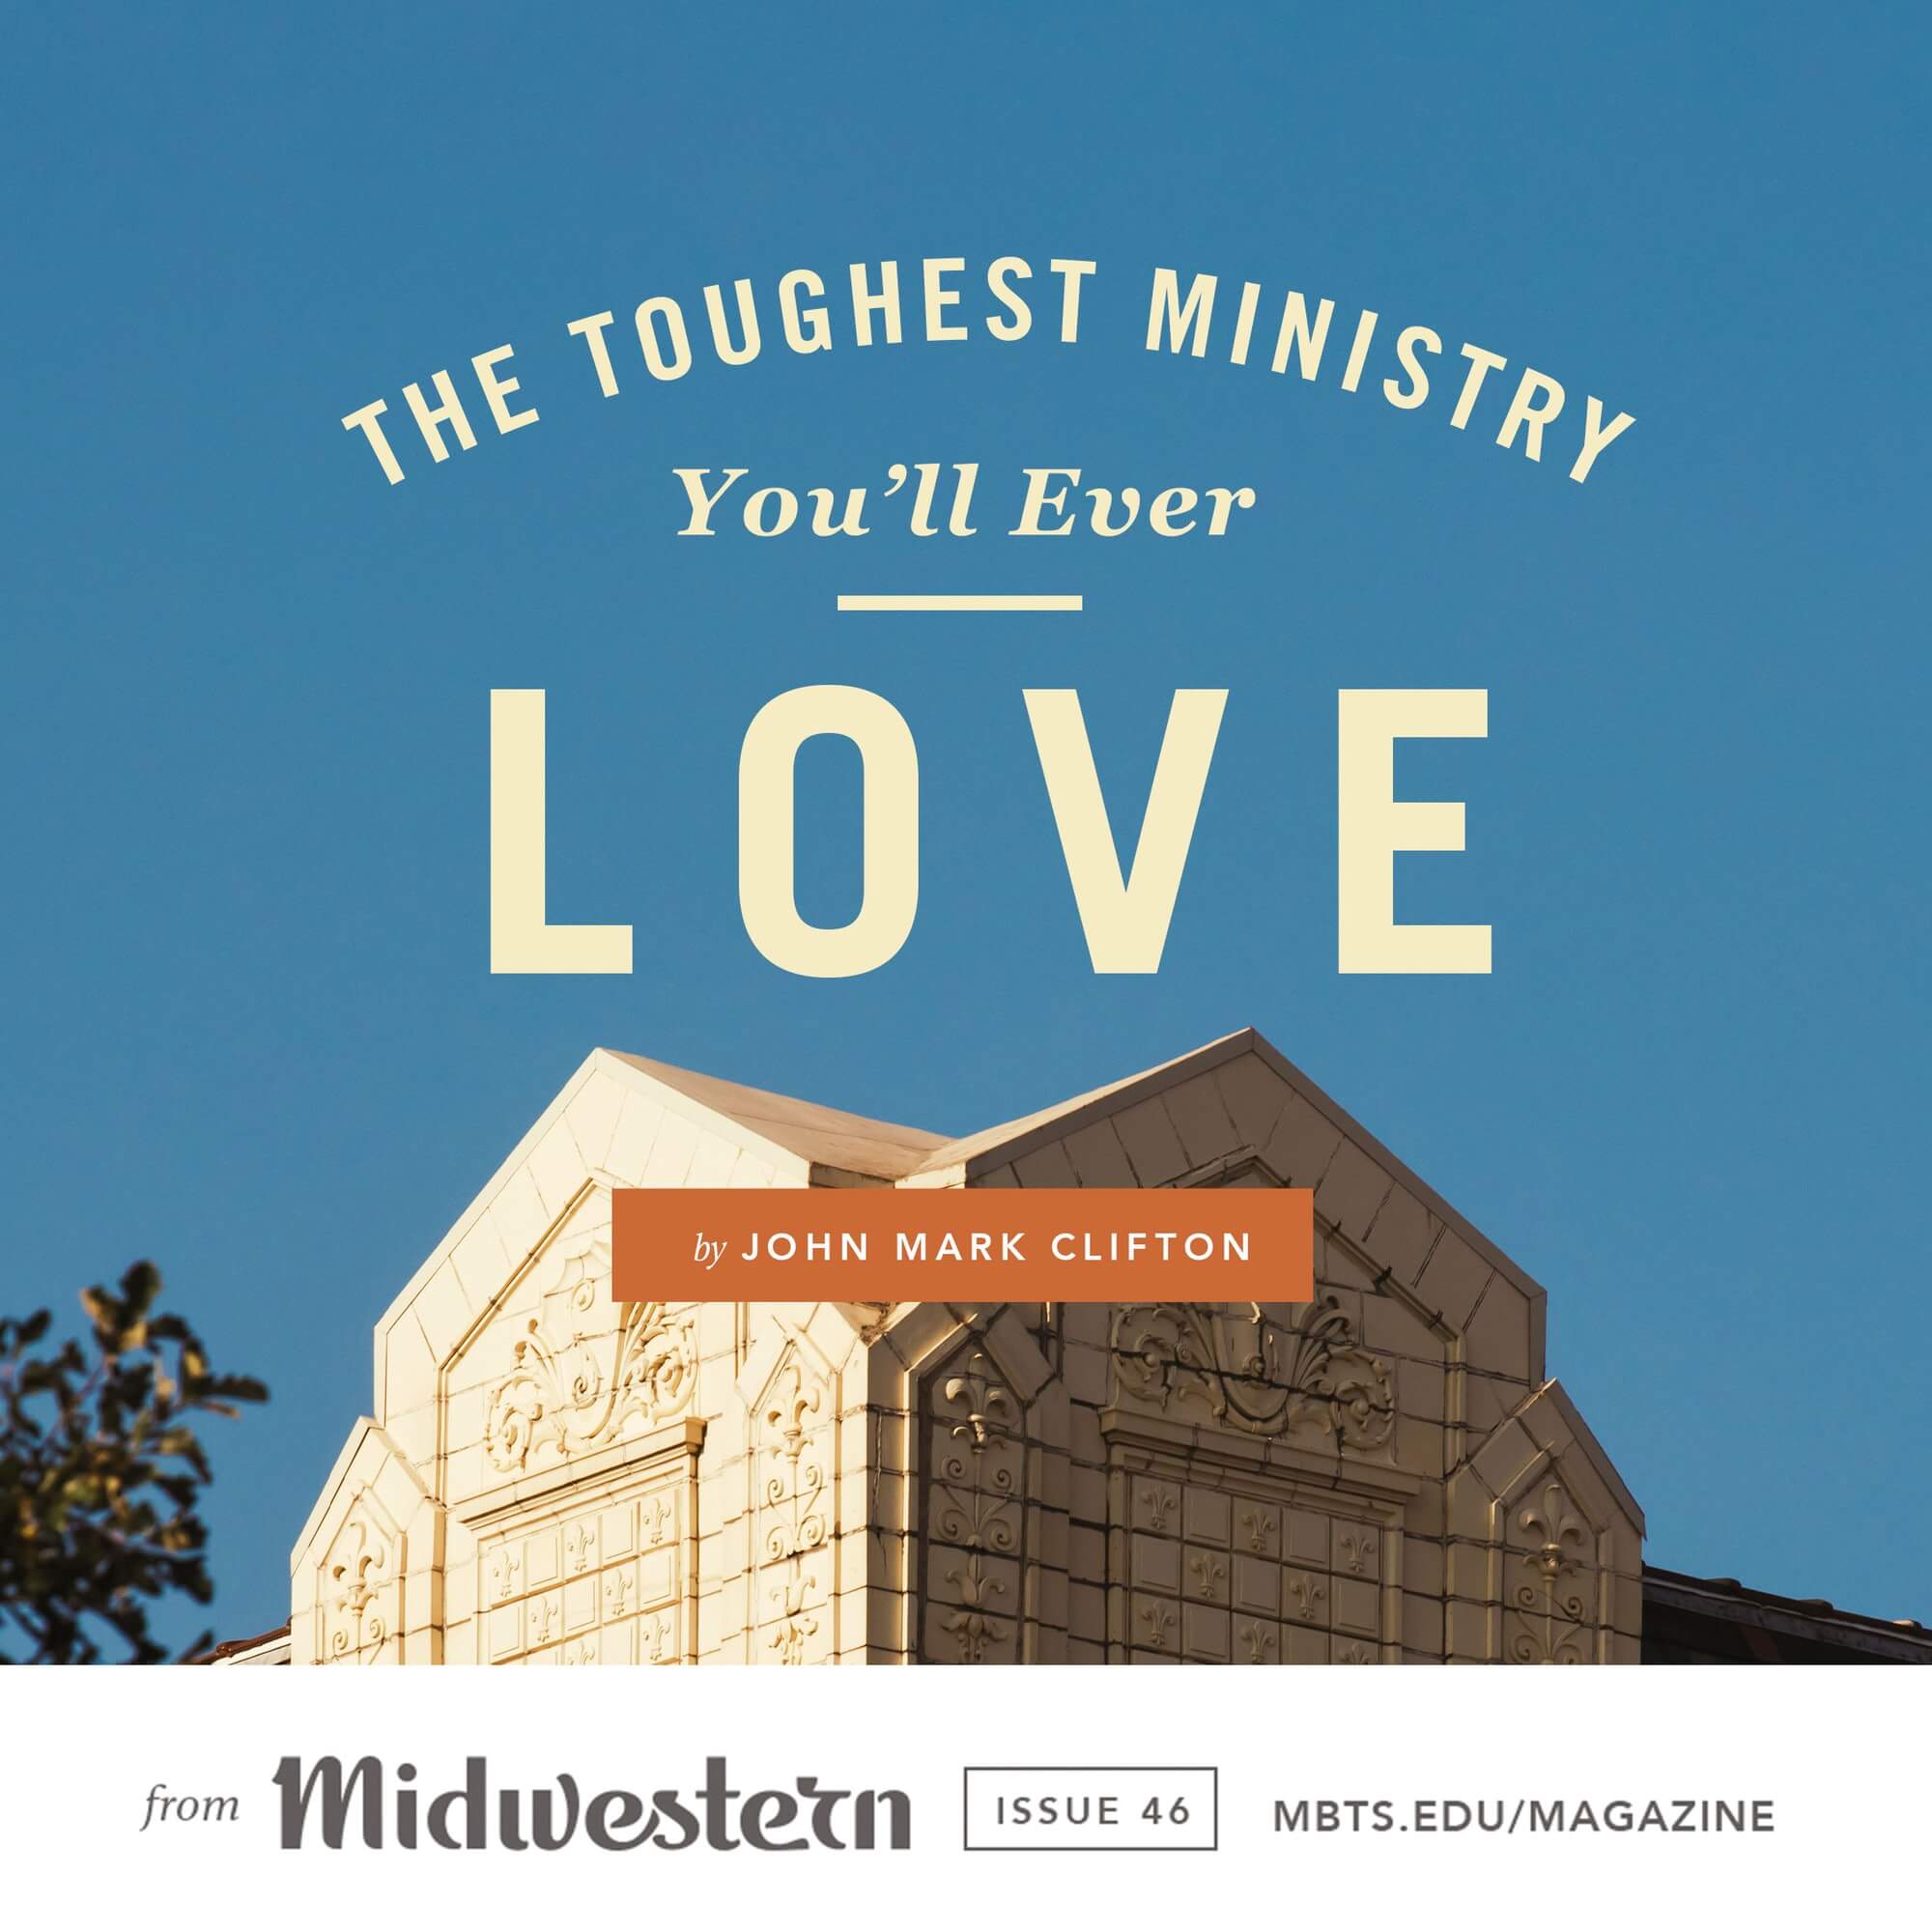 The Toughest Ministry You'll Ever Love